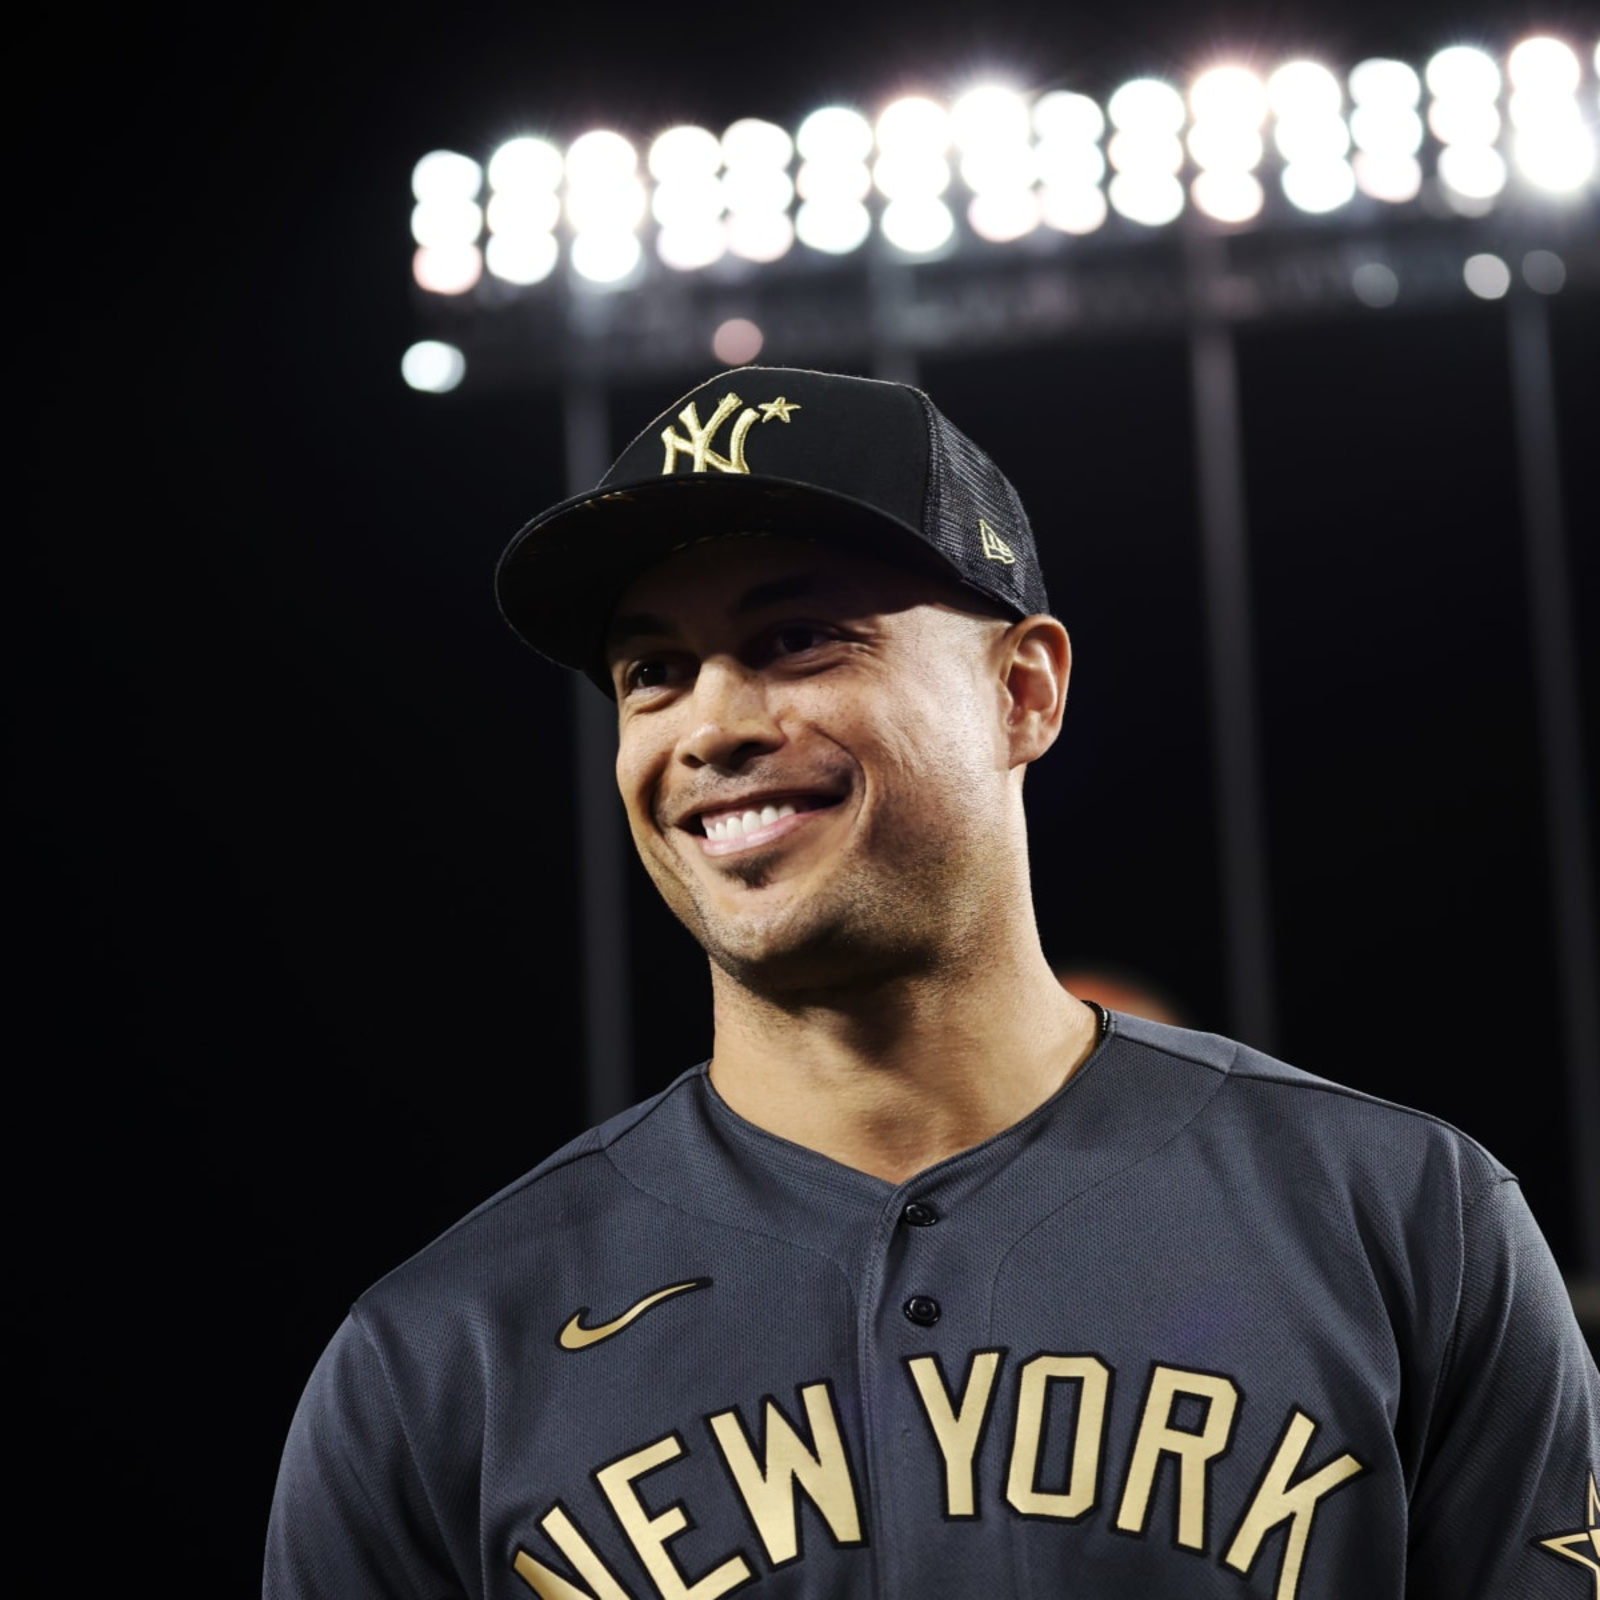 New York Yankees' Giancarlo Stanton to go on rehab assignment this